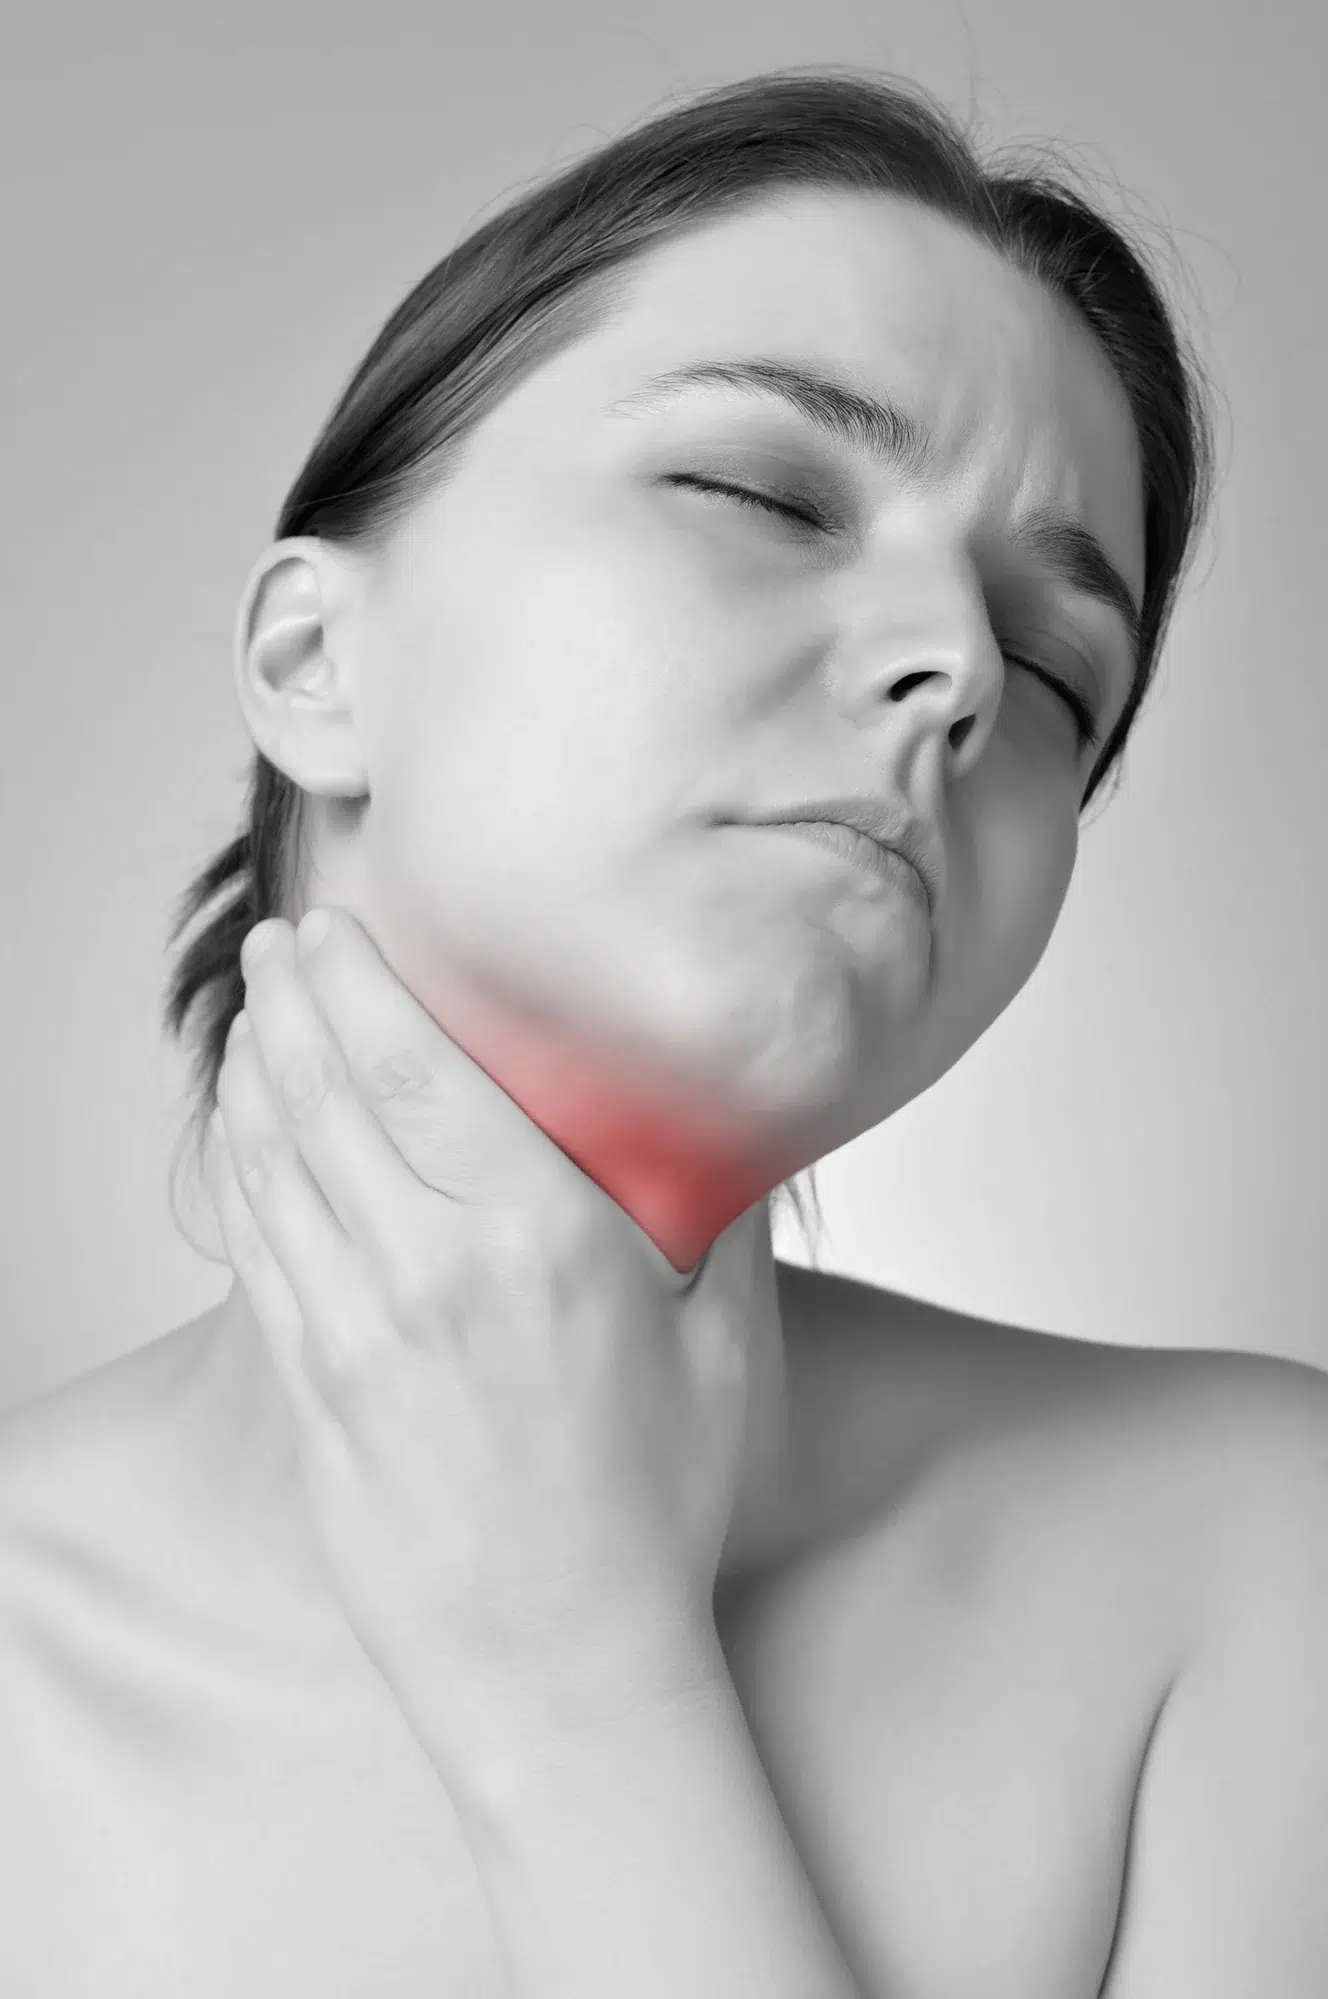 Symptoms and signs of thyroid nodules - C/V ENT Surgical Group